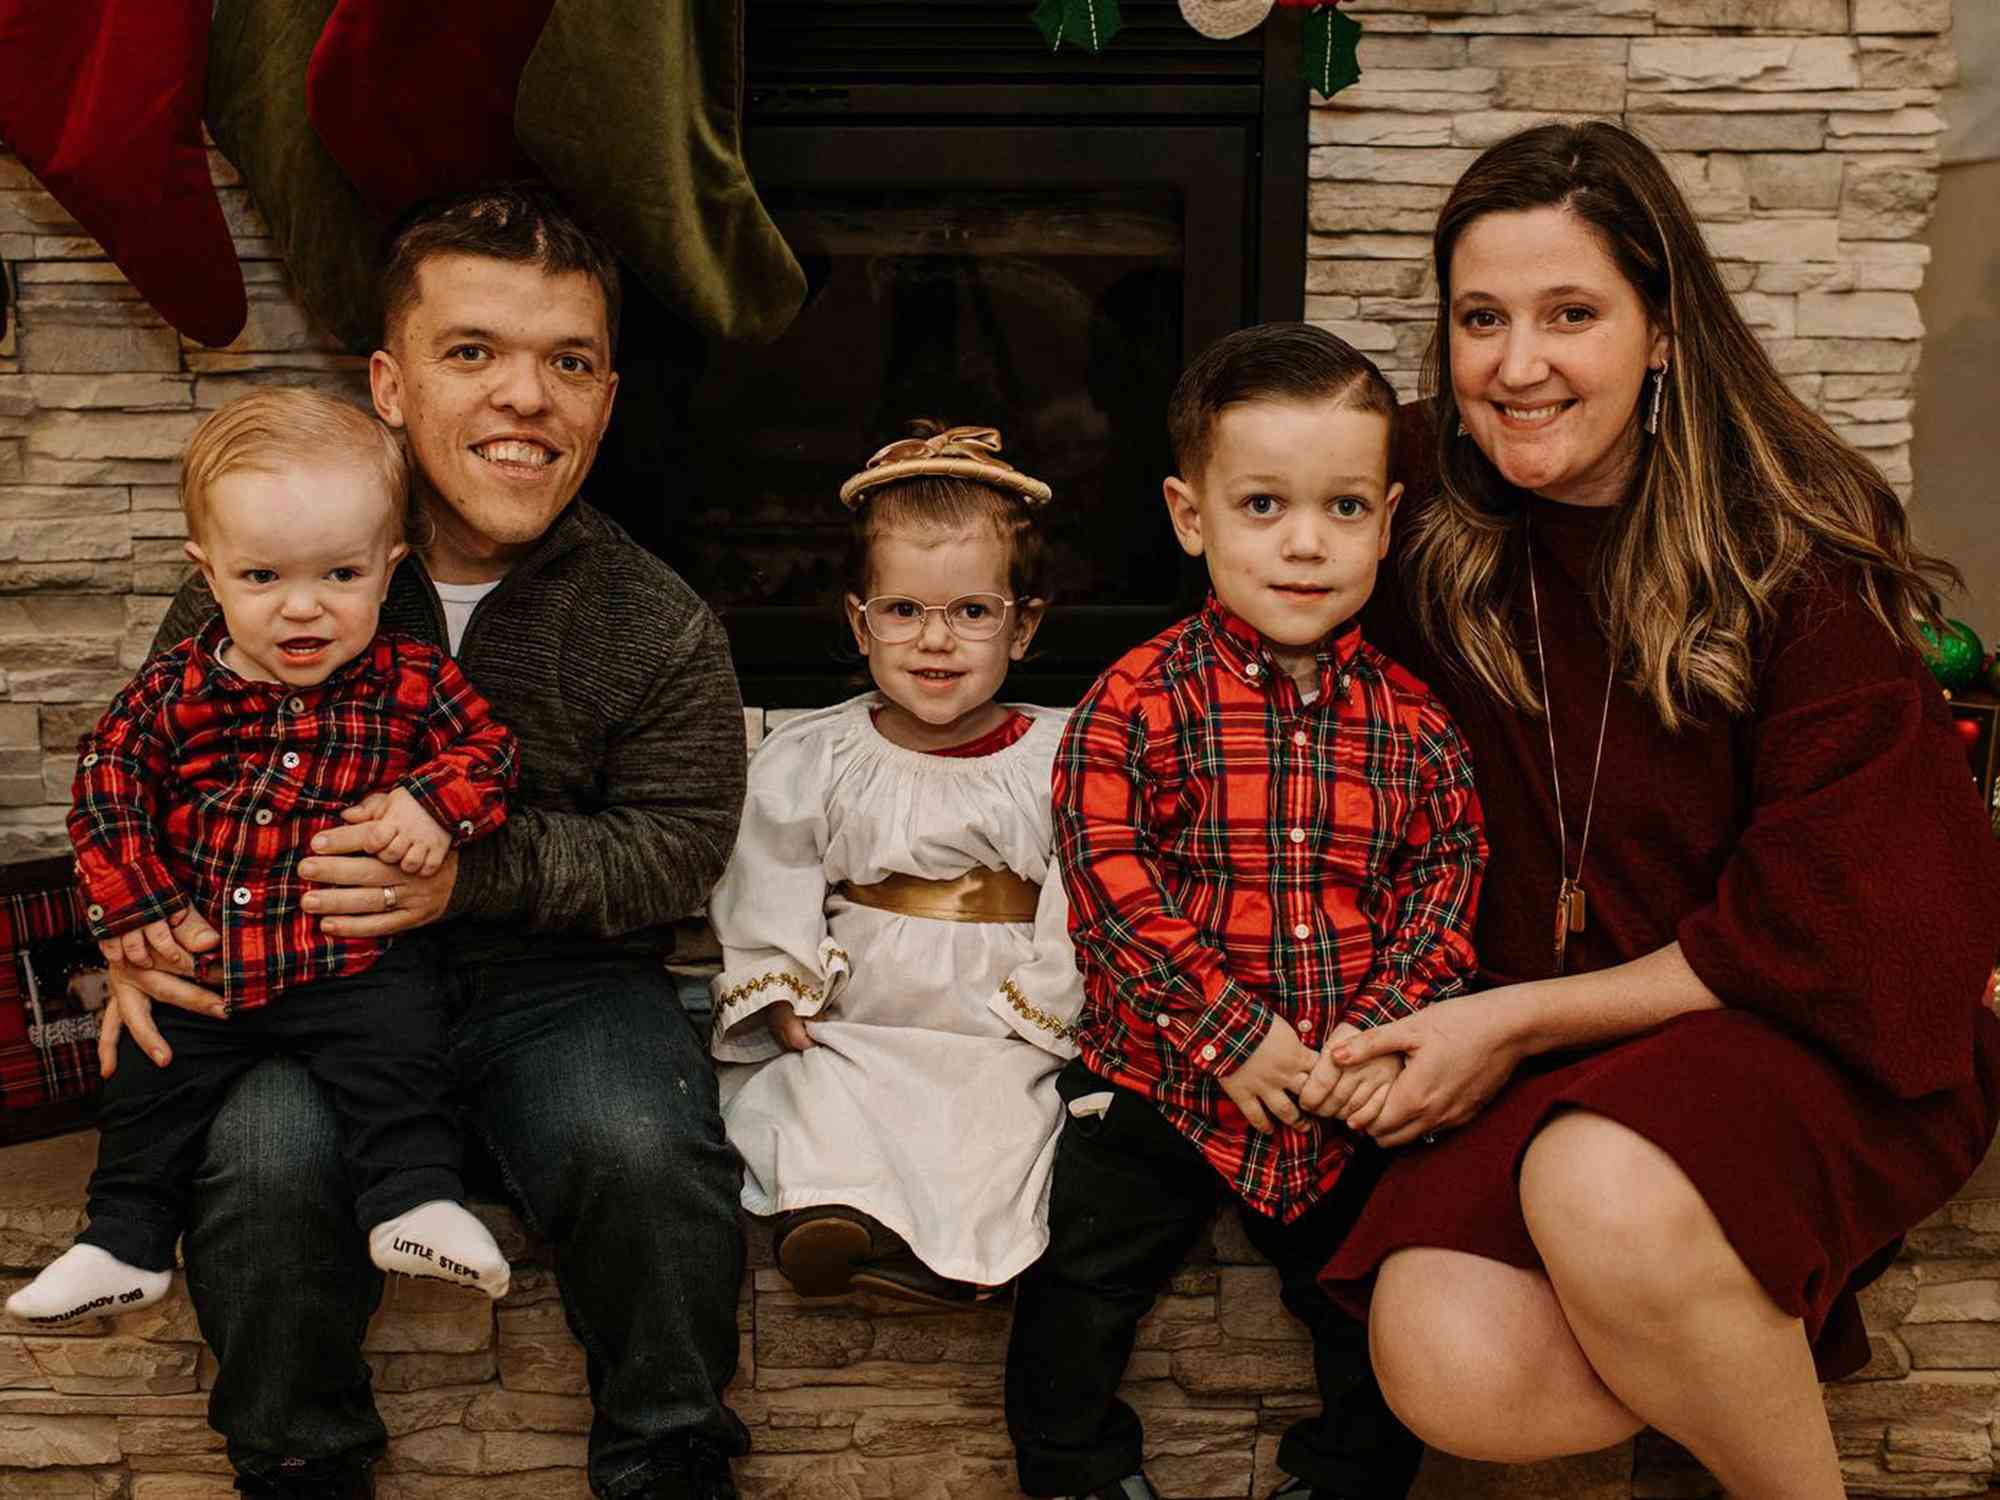 “LPBW'”s Zach Roloff Says the 'Hardest Part' of Parenting Is Feeling 'Guilt' When You 'Don't Do' It Well